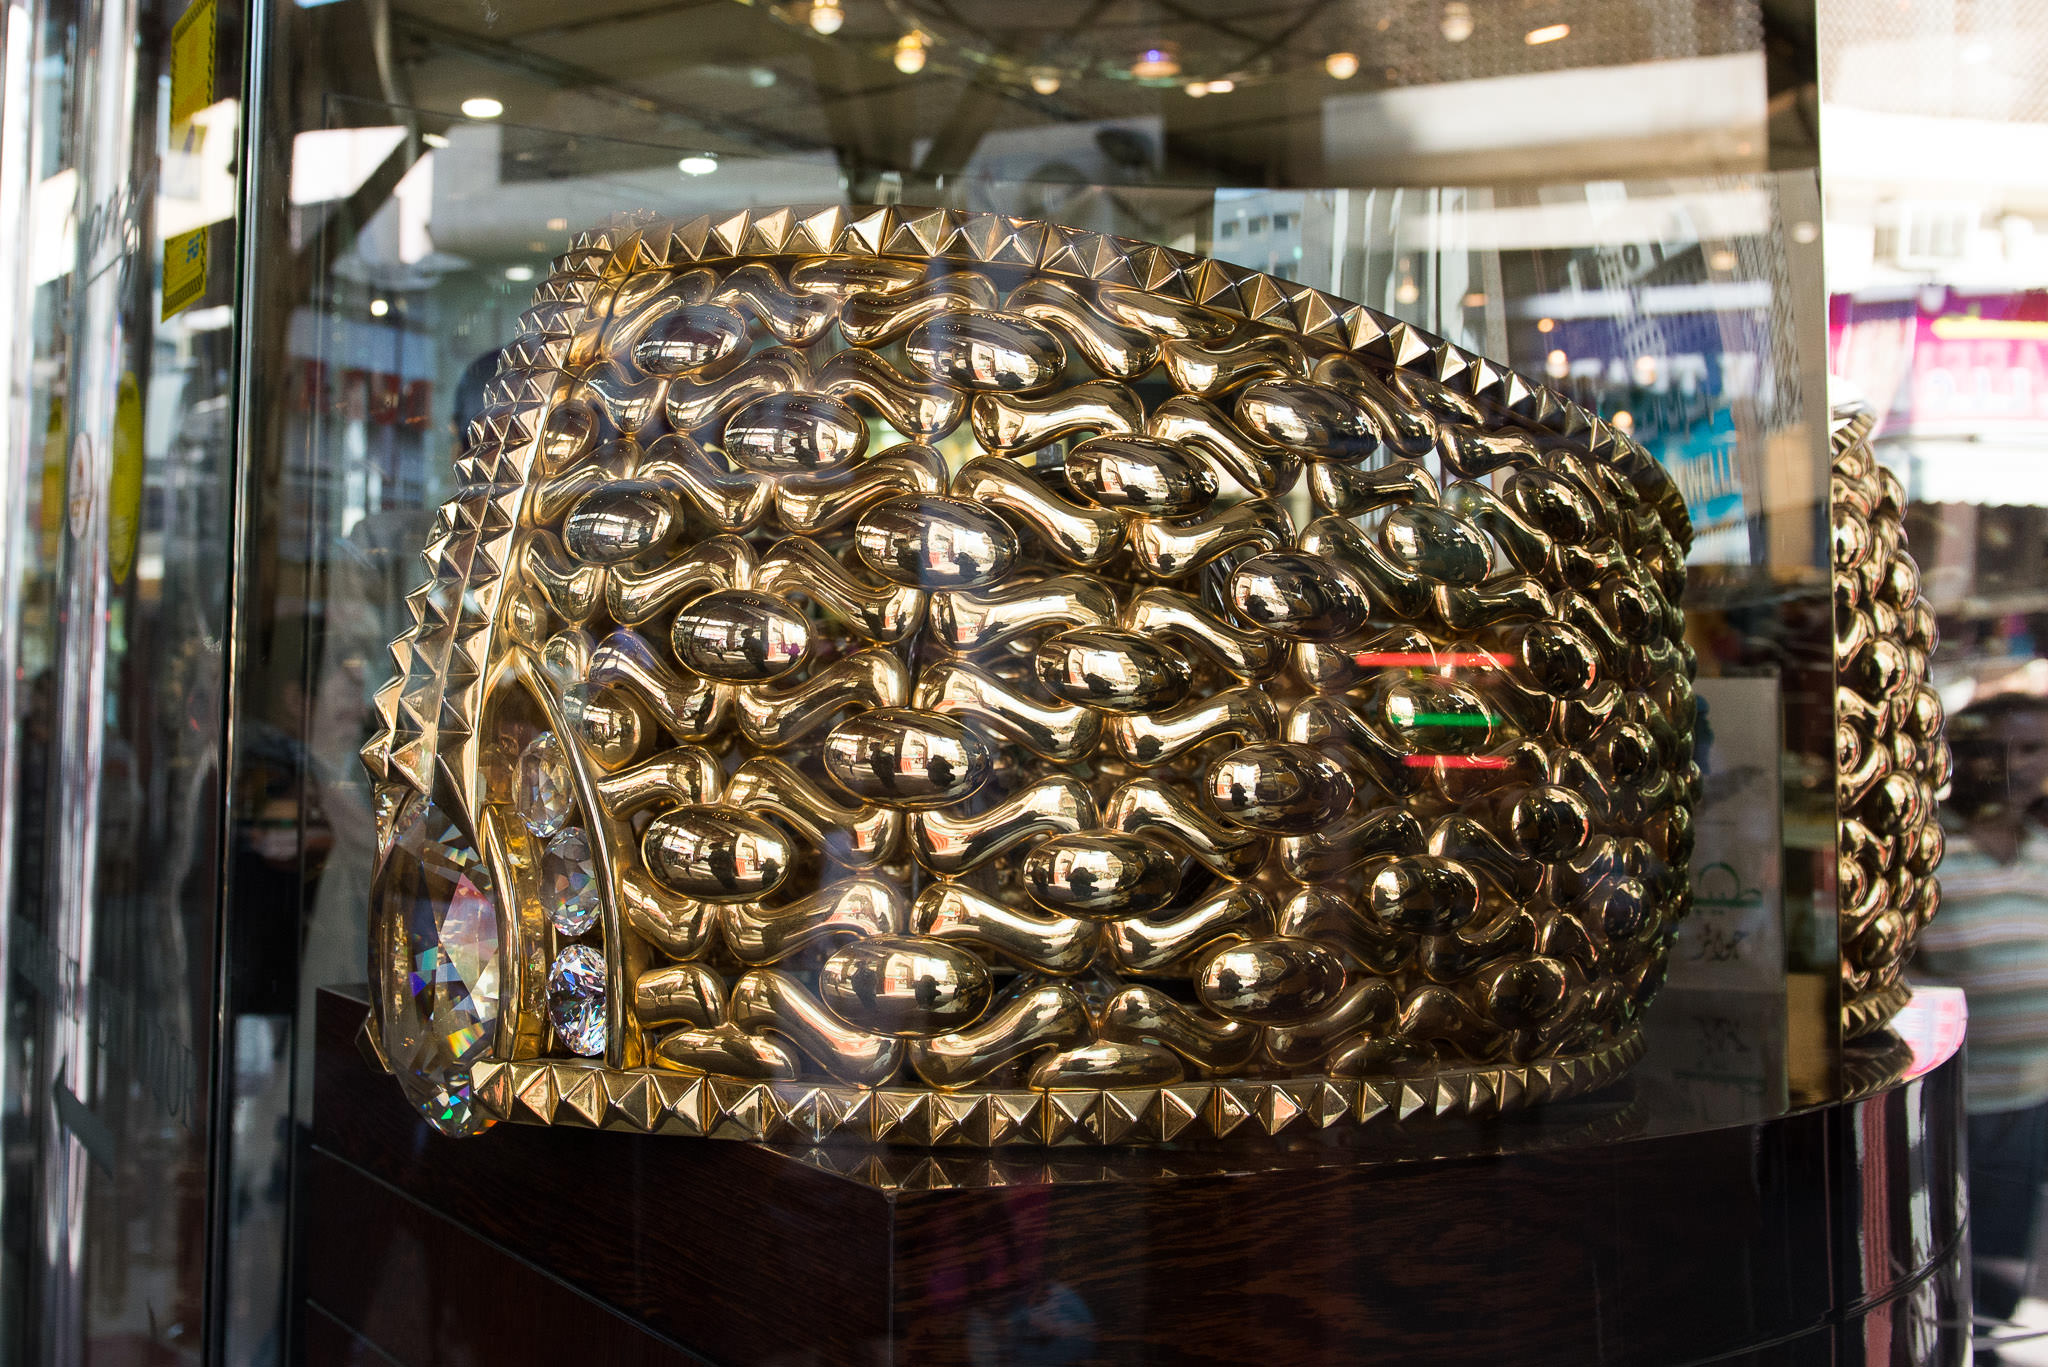 The largest gold ring in the world